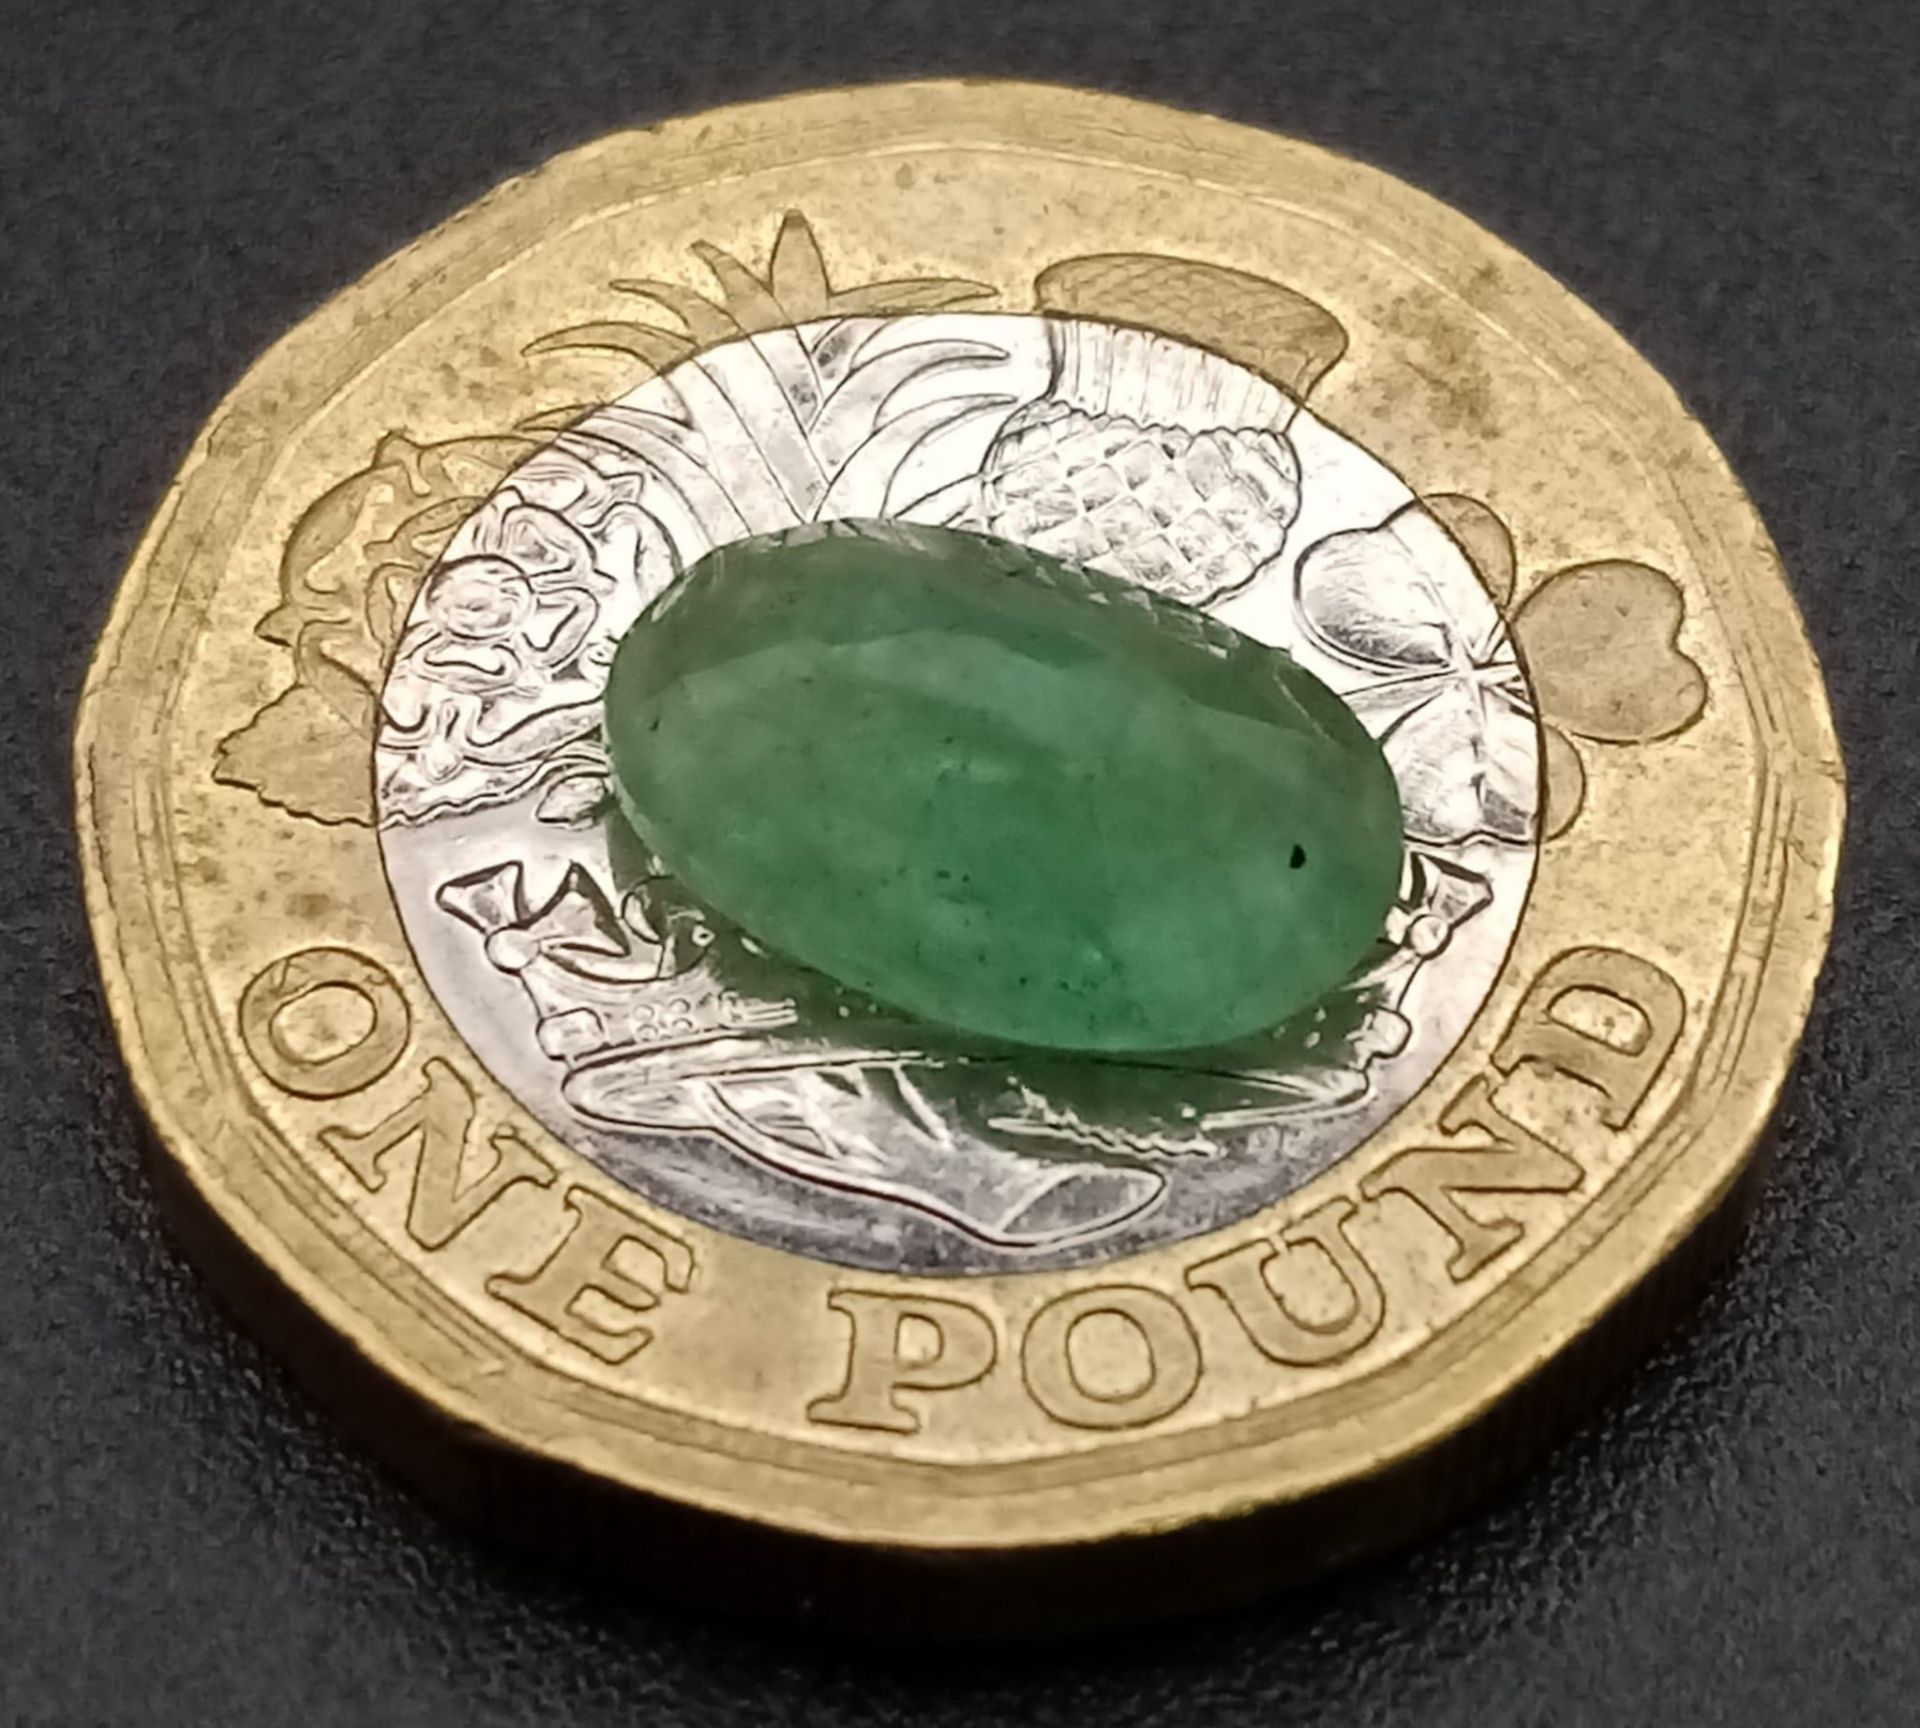 A 2.14ct Faceted Zambian Emerald Gemstone. Oval Shape. IGL&I Certified. - Image 3 of 4